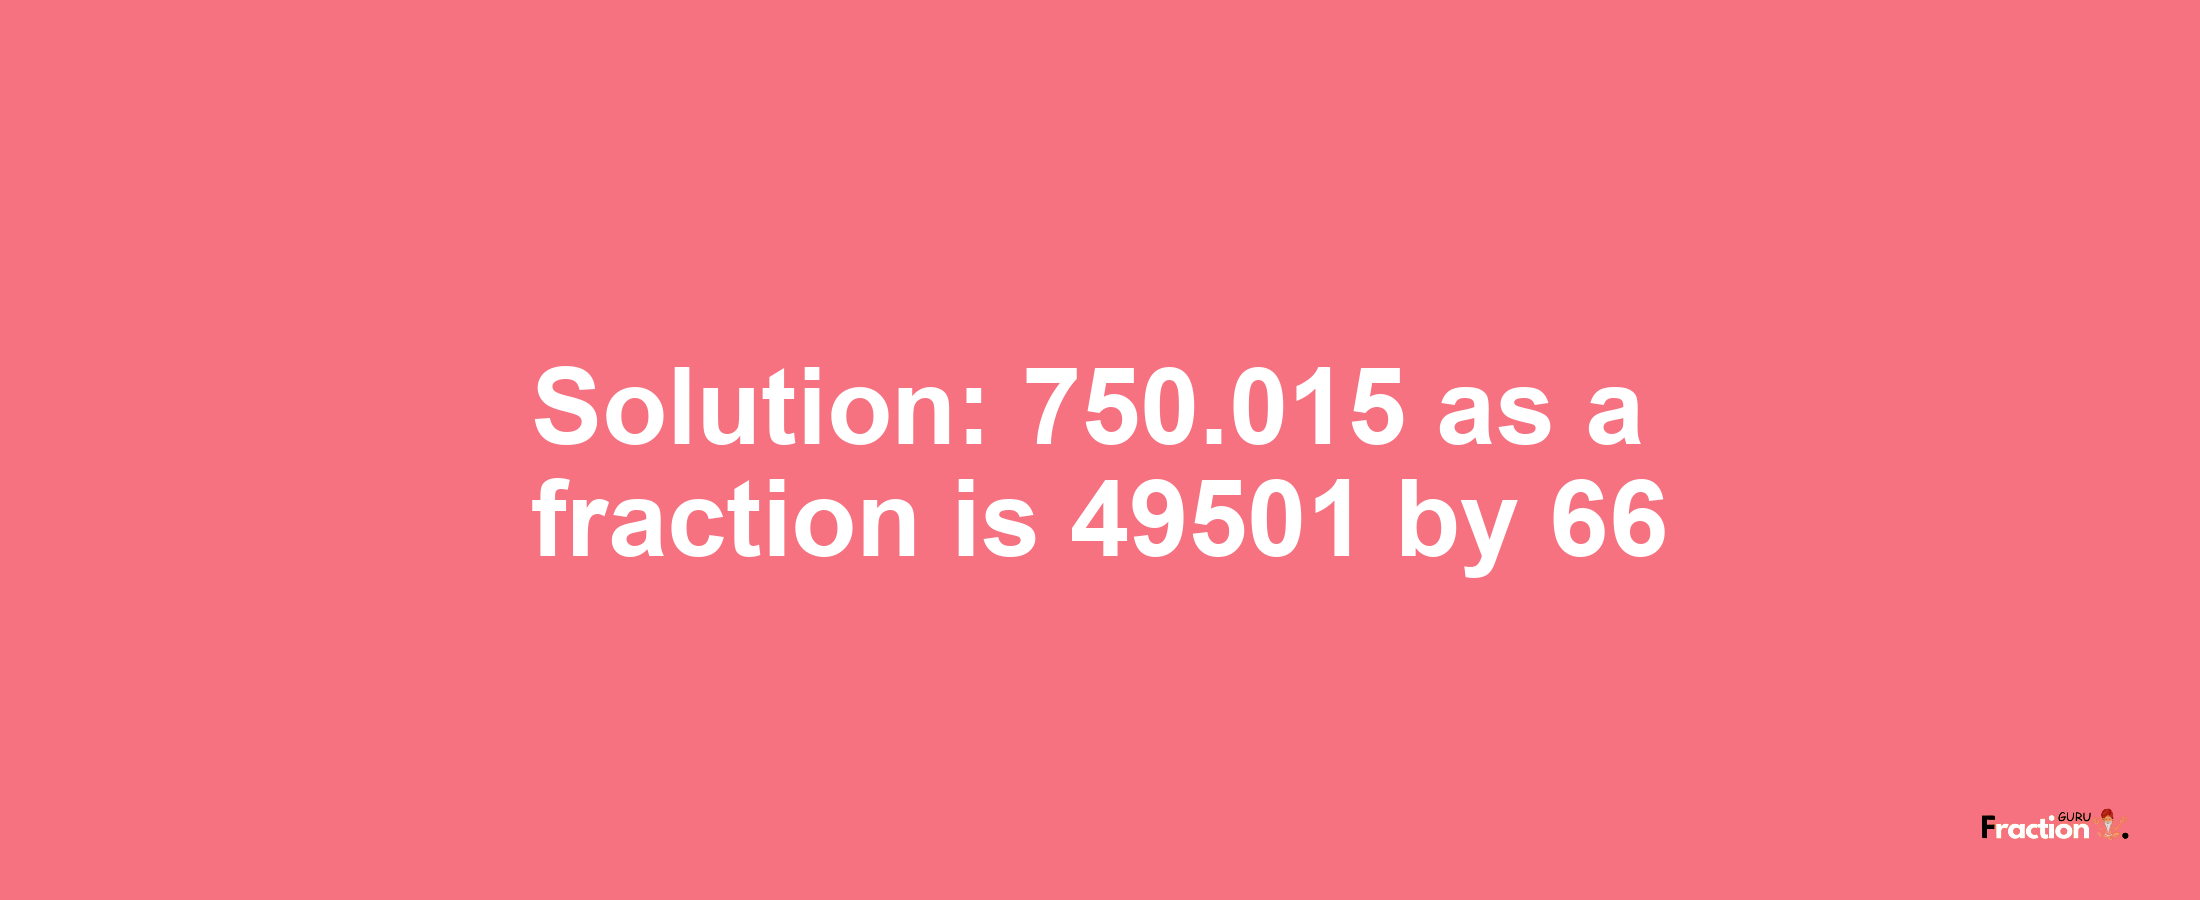 Solution:750.015 as a fraction is 49501/66